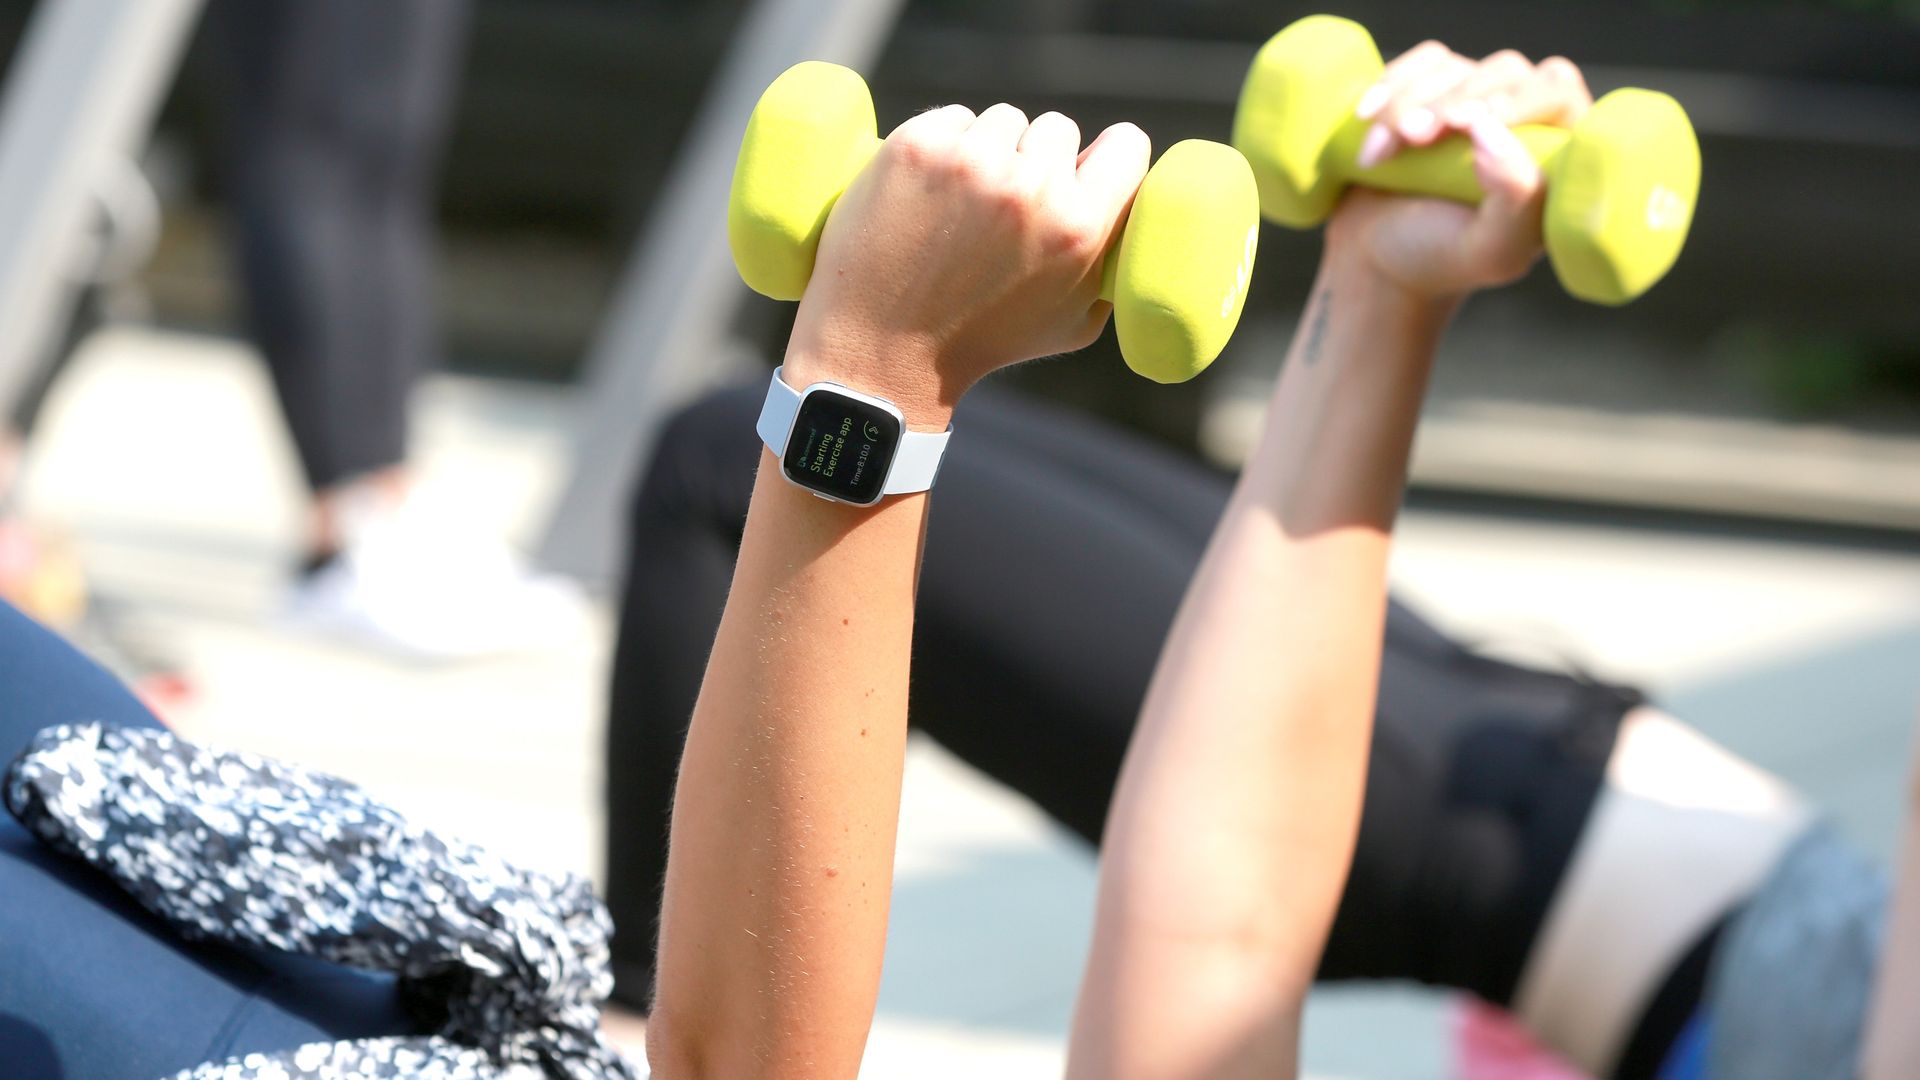 people holding dumbbells as they work out with a Fitbit fitness tracker